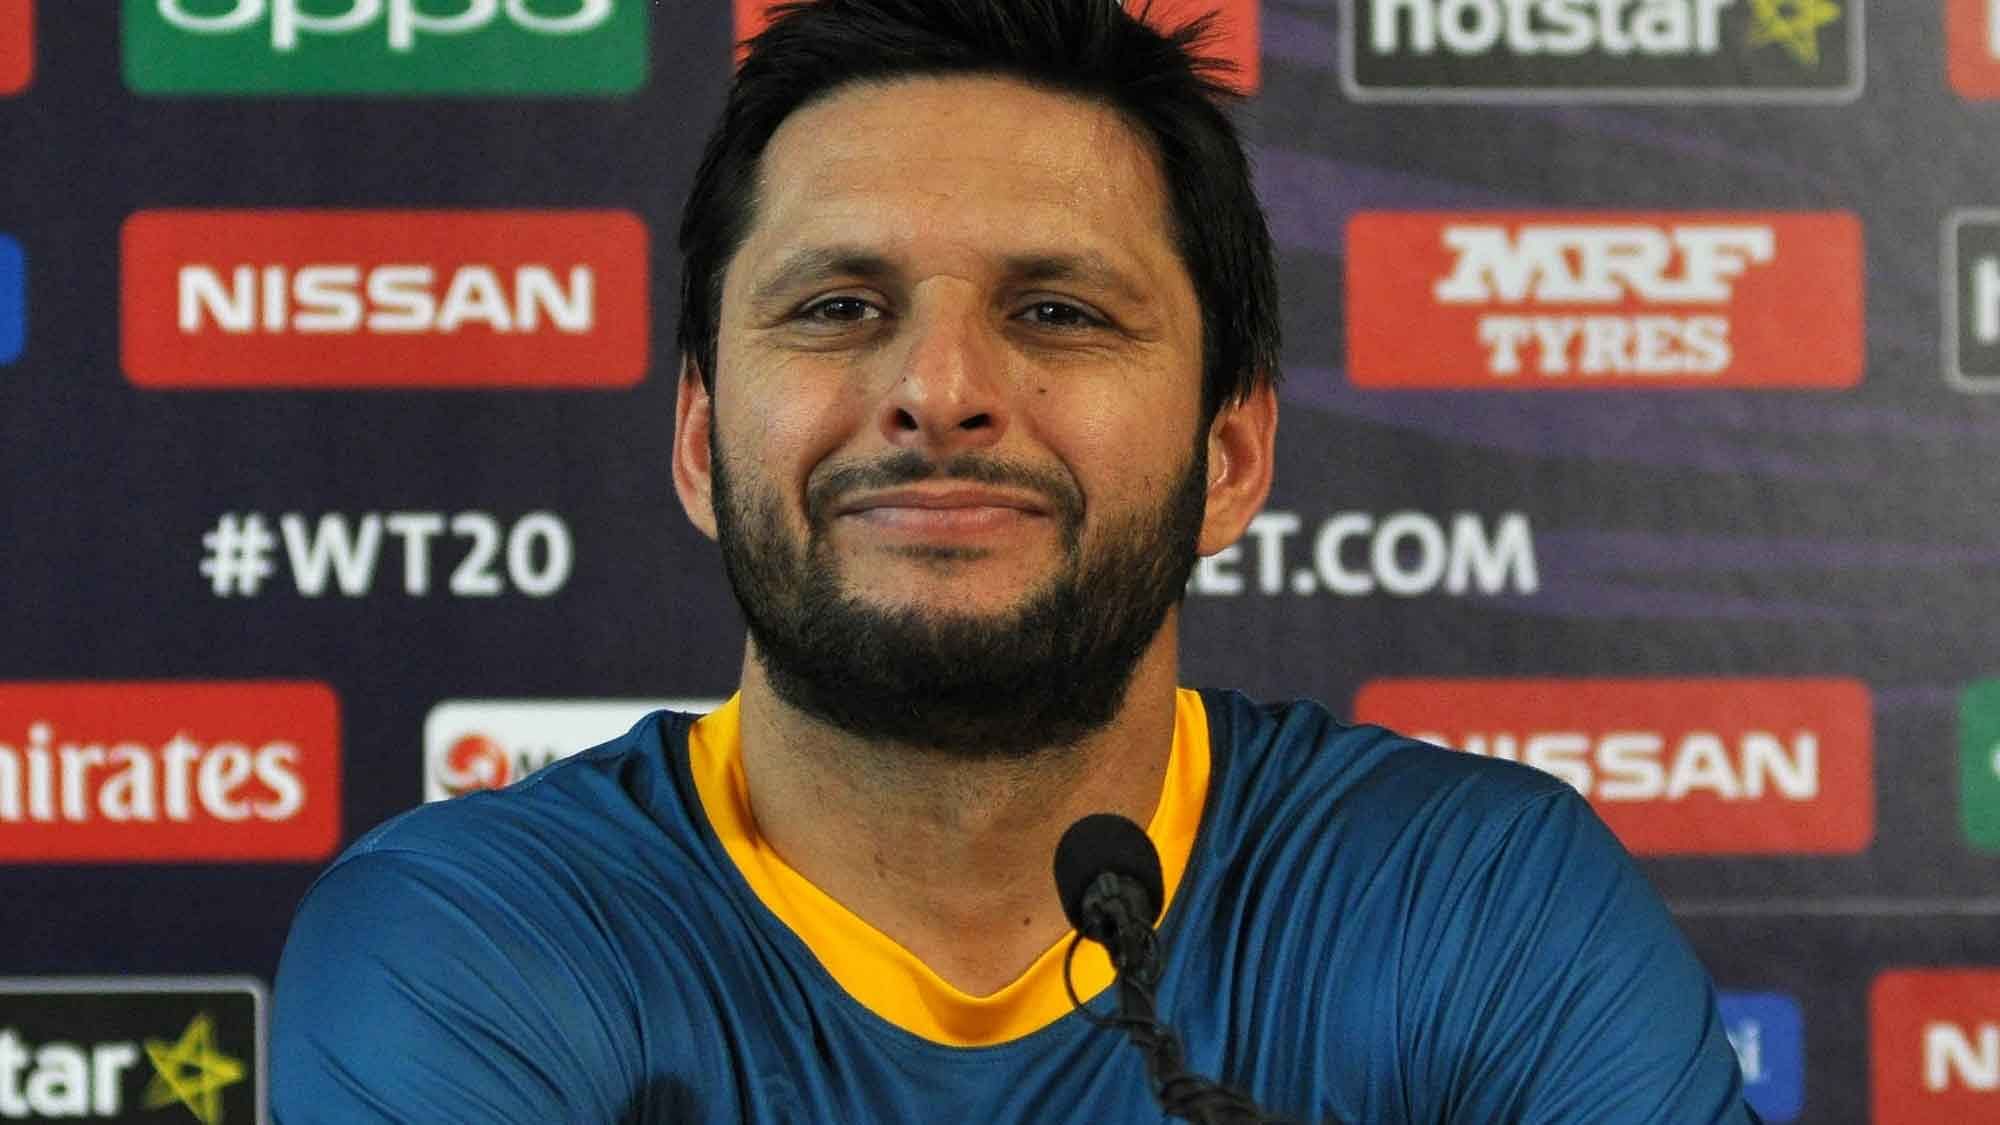 Former Pakistan cricketer Shahid Afridi has said that Kashmir belongs to the people of the valley and not India or Pakistan.